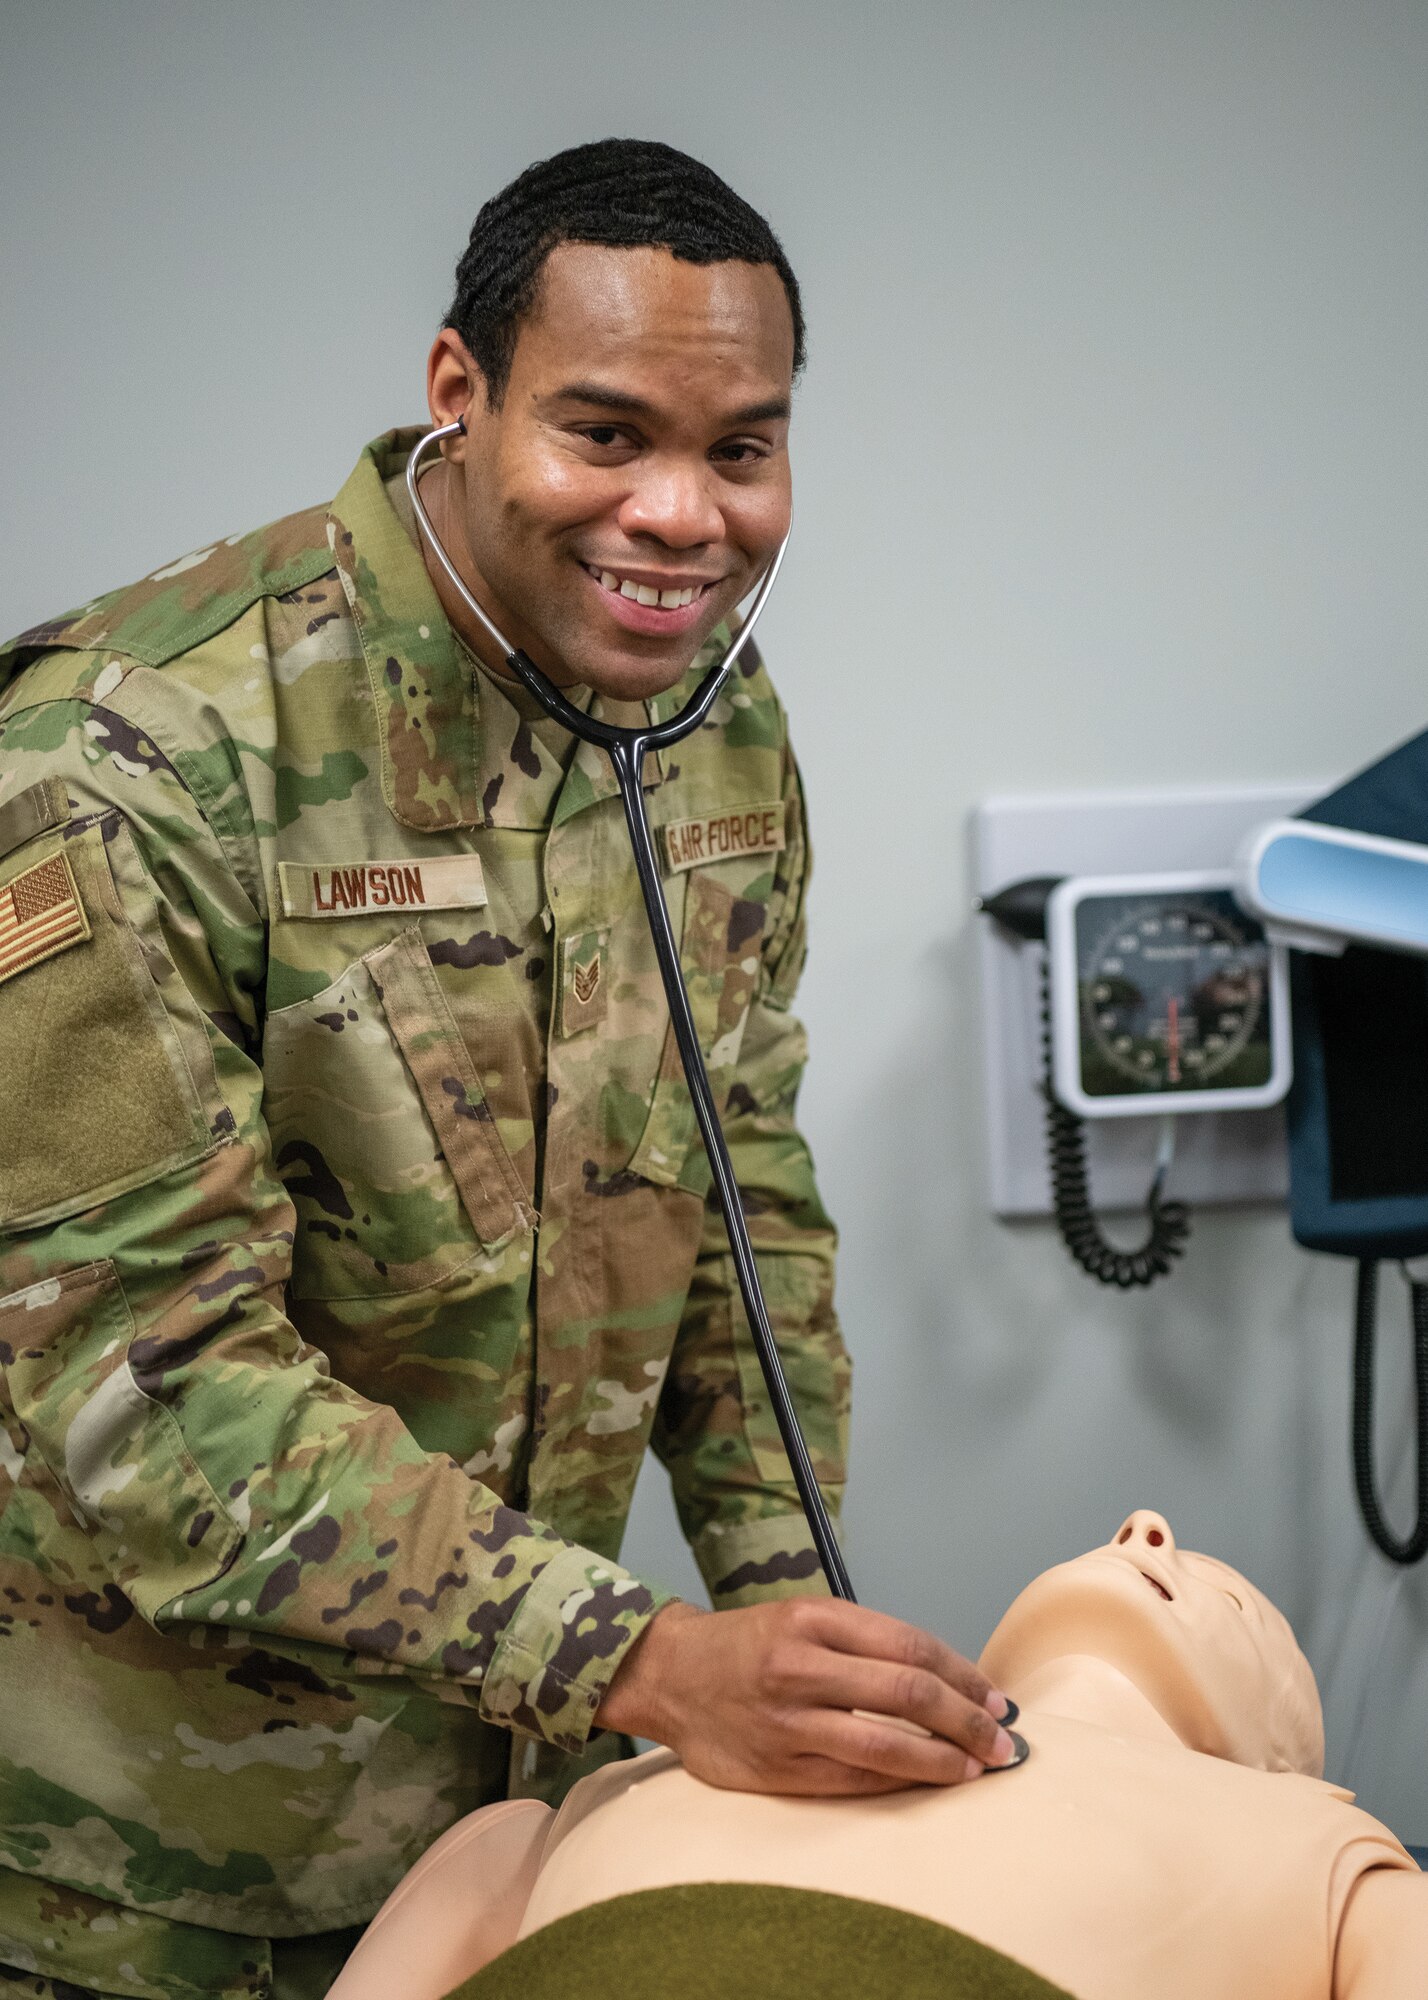 Staff Sgt. Markell D. Lawson, 445th Aerospace Medical Squadron aerospace medical technician, is the 445th Airlift Wing March 2022 Spotlight Performer.